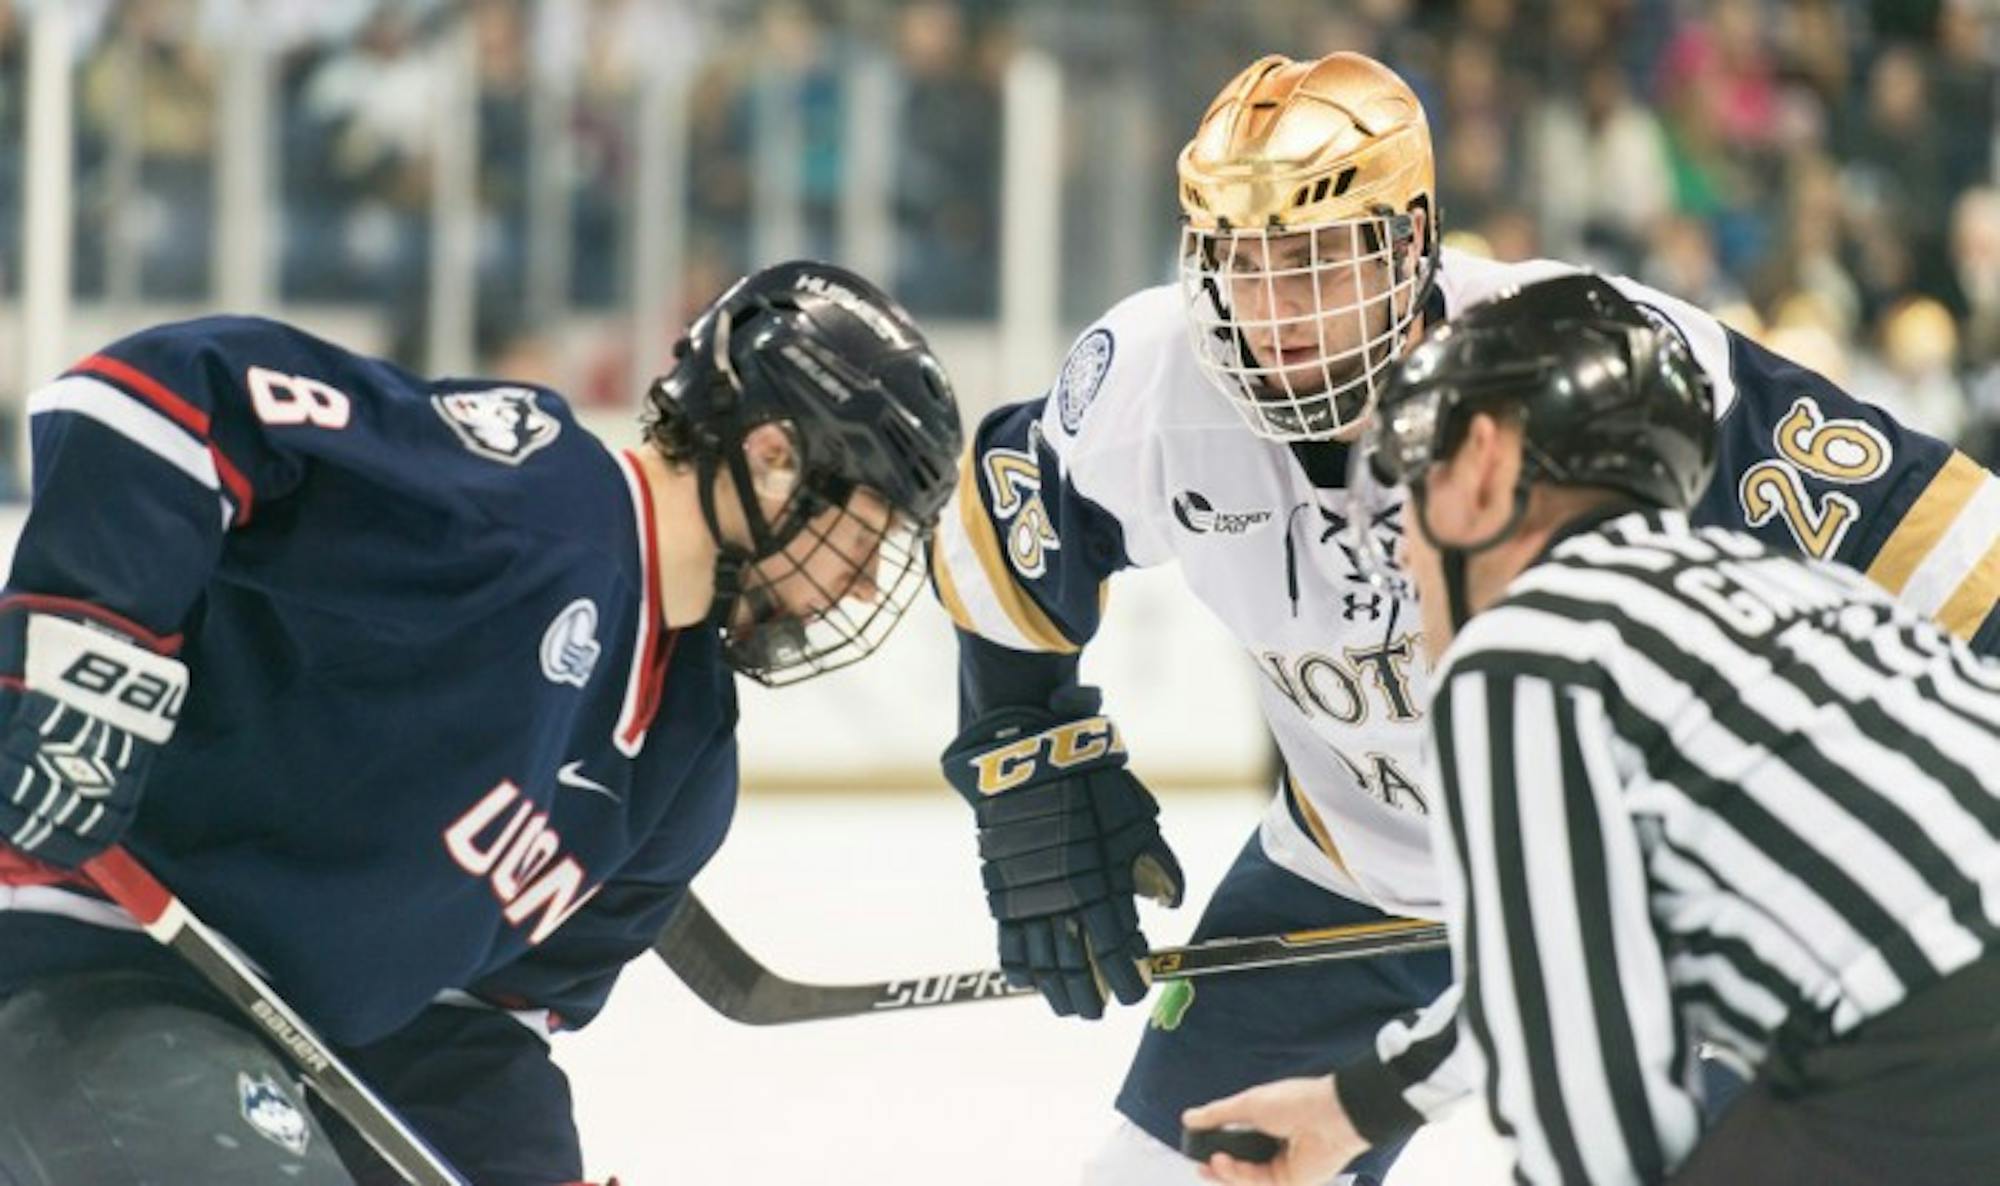 Senior center and team captian Steven Fogarty readies for a faceoff during a 3-3 tie against Hockey East foe Uconn on Jan. 16 at Compton Family Ice Arena. The team will skate with Uconn again this weekend.